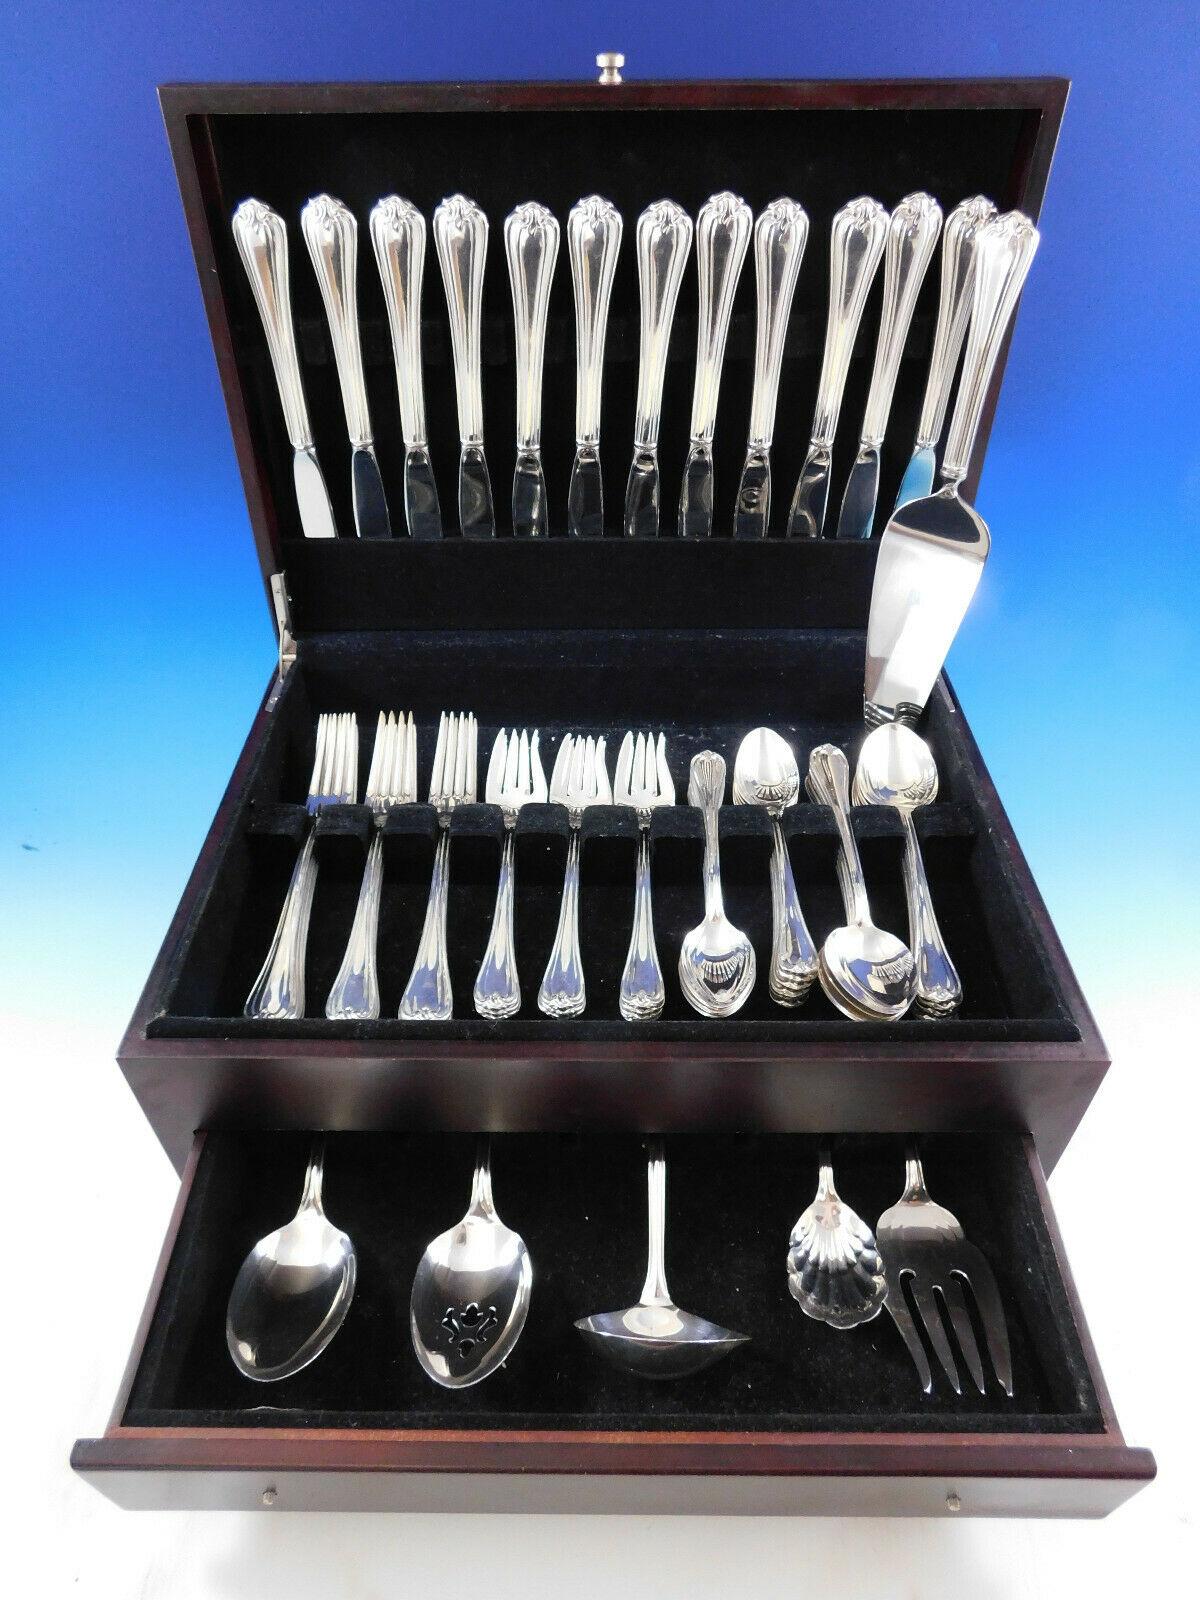 Stunning woodwind by Reed & Barton sterling silver flatware set, 66 pieces. This set includes:

12 Knives, 9